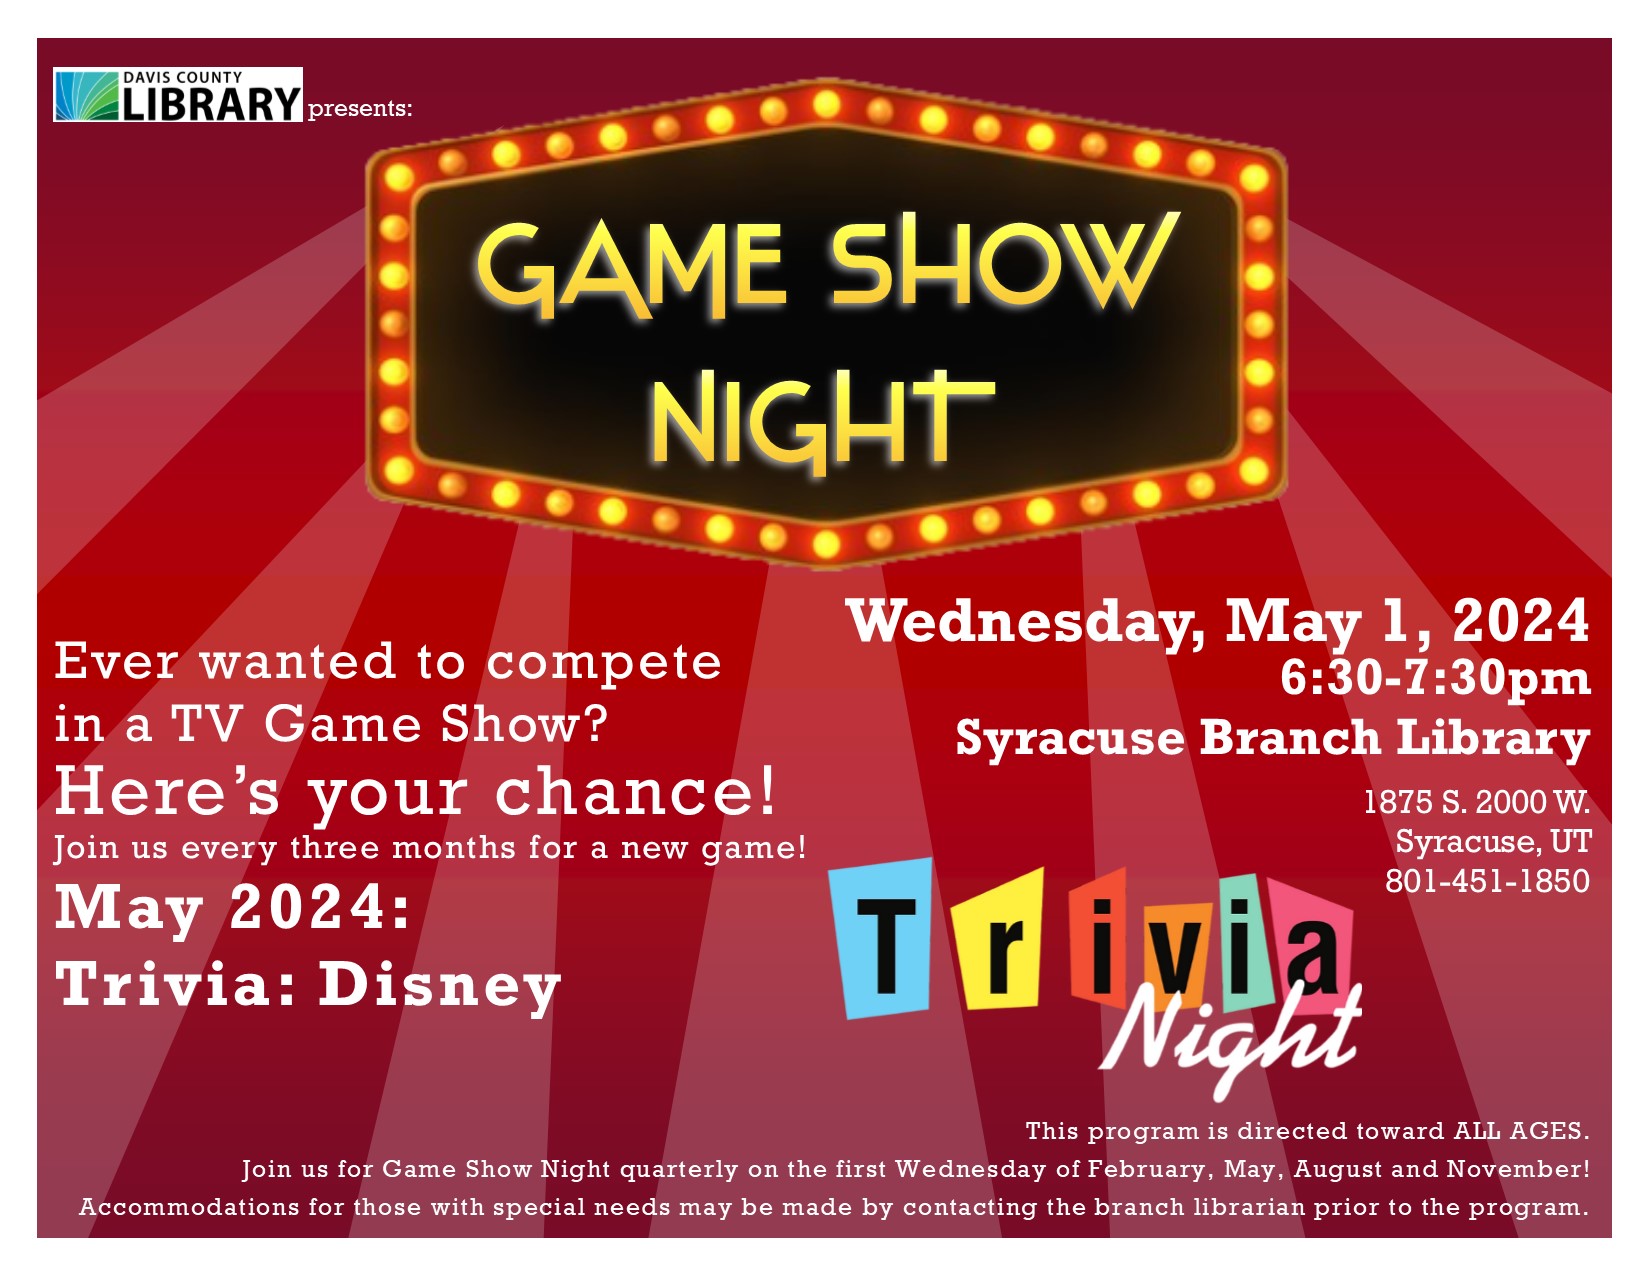 Ever wanted to compete in a TV Game Show? Here’s your chance! Join us every three months for a new game! May 2024: Trivia: Disney